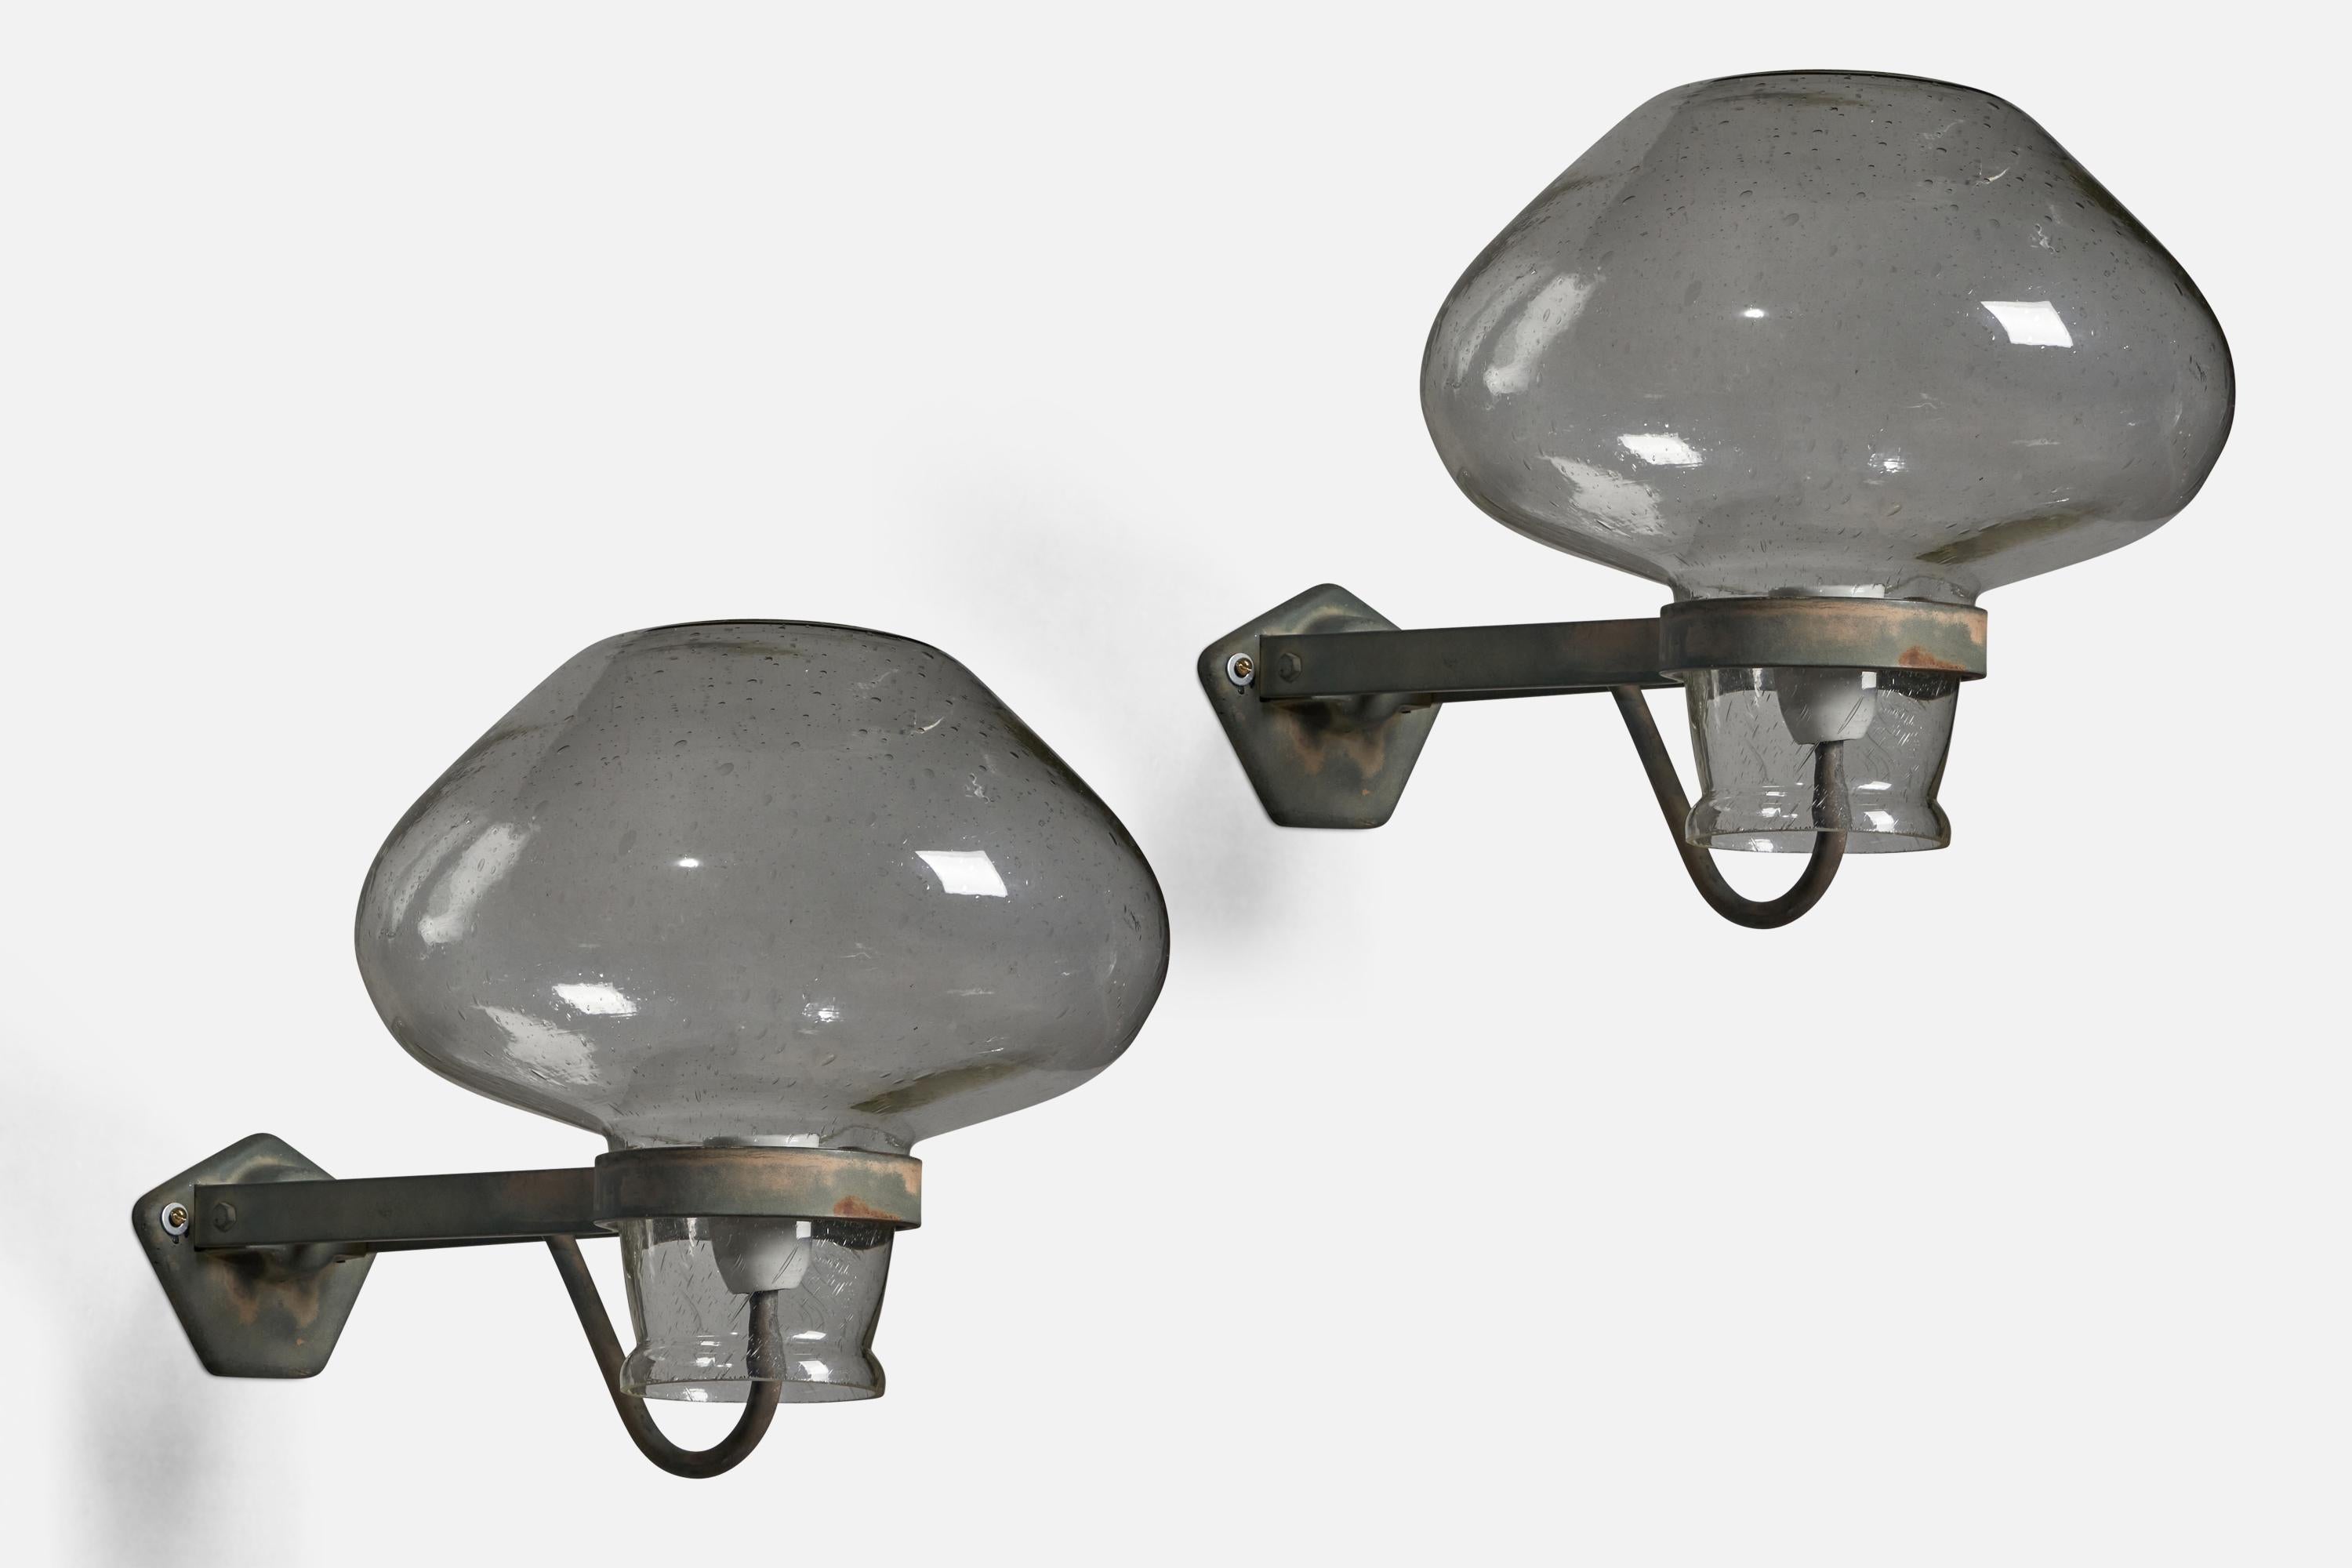 A pair of large black-painted iron and blown glass wall lights designed by Gunnar Asplund and produced by ASEA, Sweden, 1940s.

Overall Dimensions (inches): 15” H x 14” W x 21.5” D
Back Plate Dimensions (inches): 4.75” H x 6” W
Bulb Specifications: